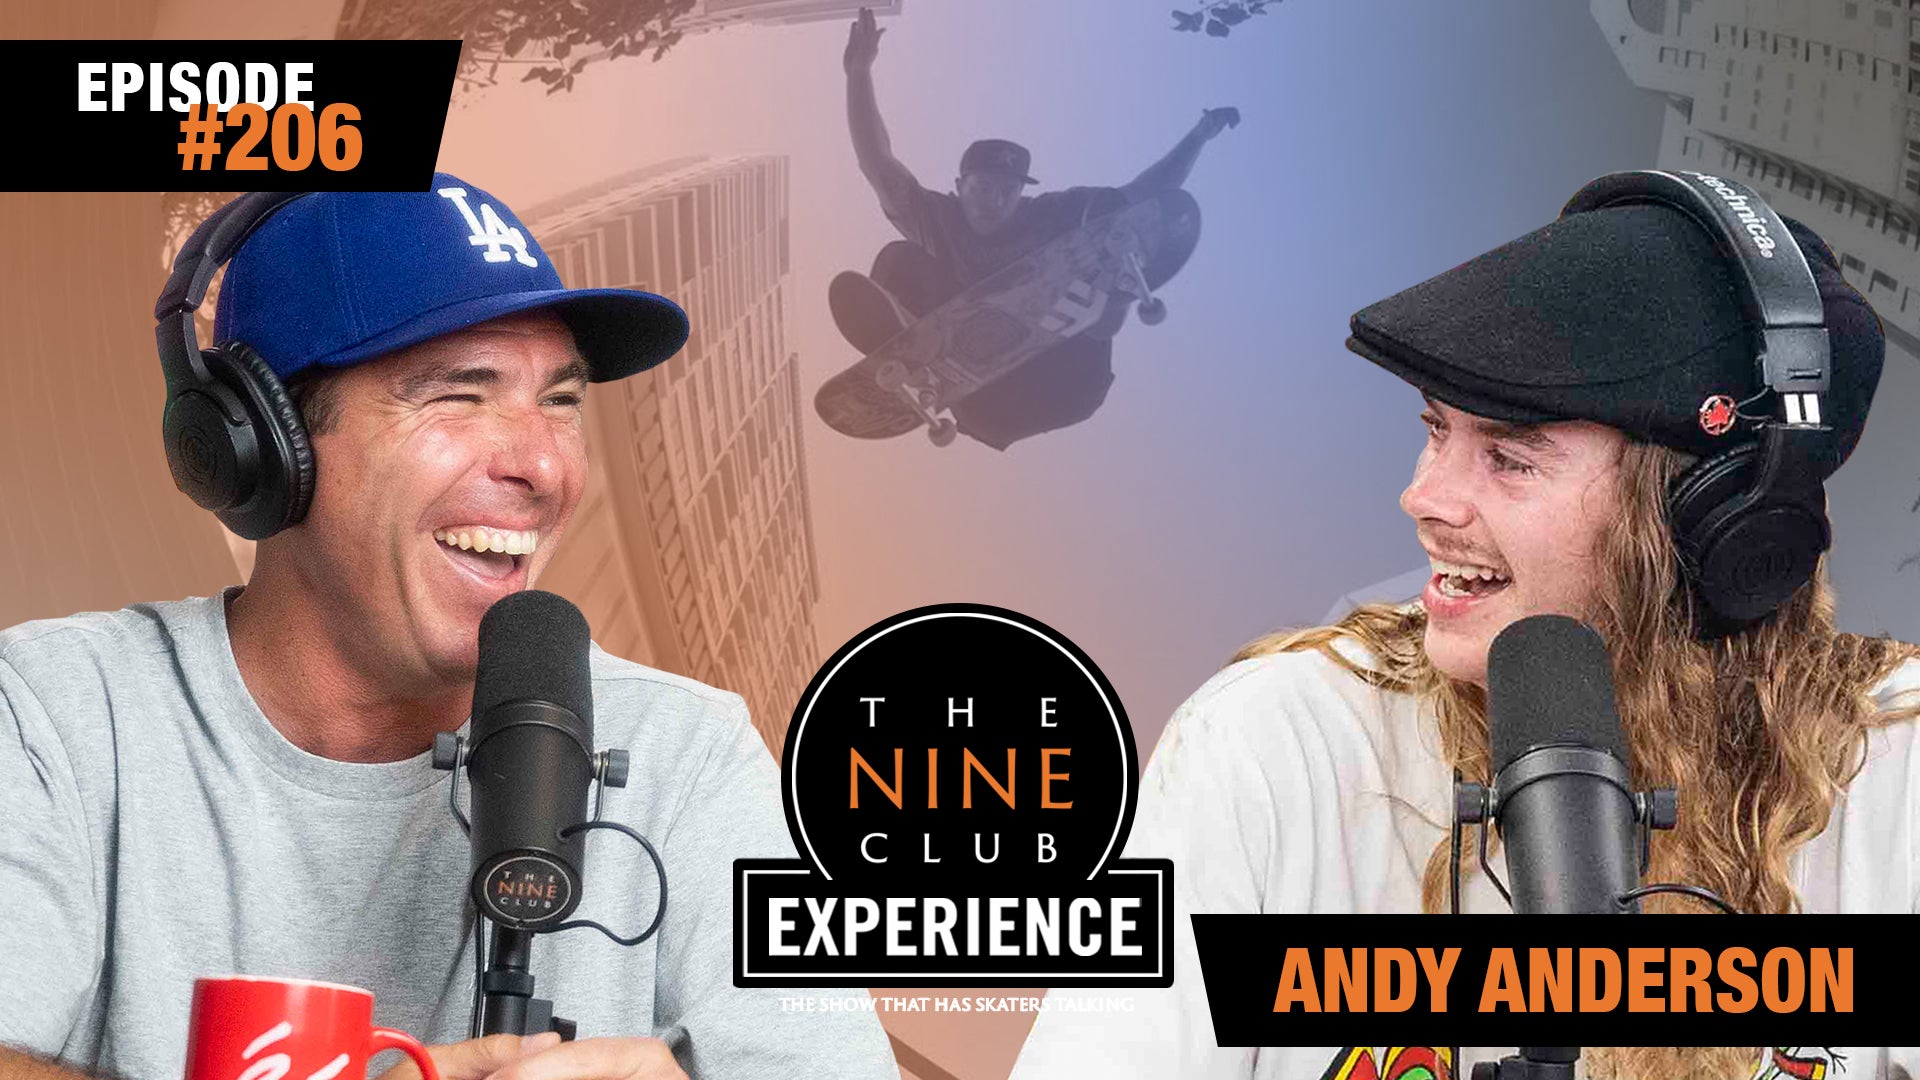 EXPERIENCE #206 - Andy Anderson, Plan B Code, Top 5 Favorite Styles